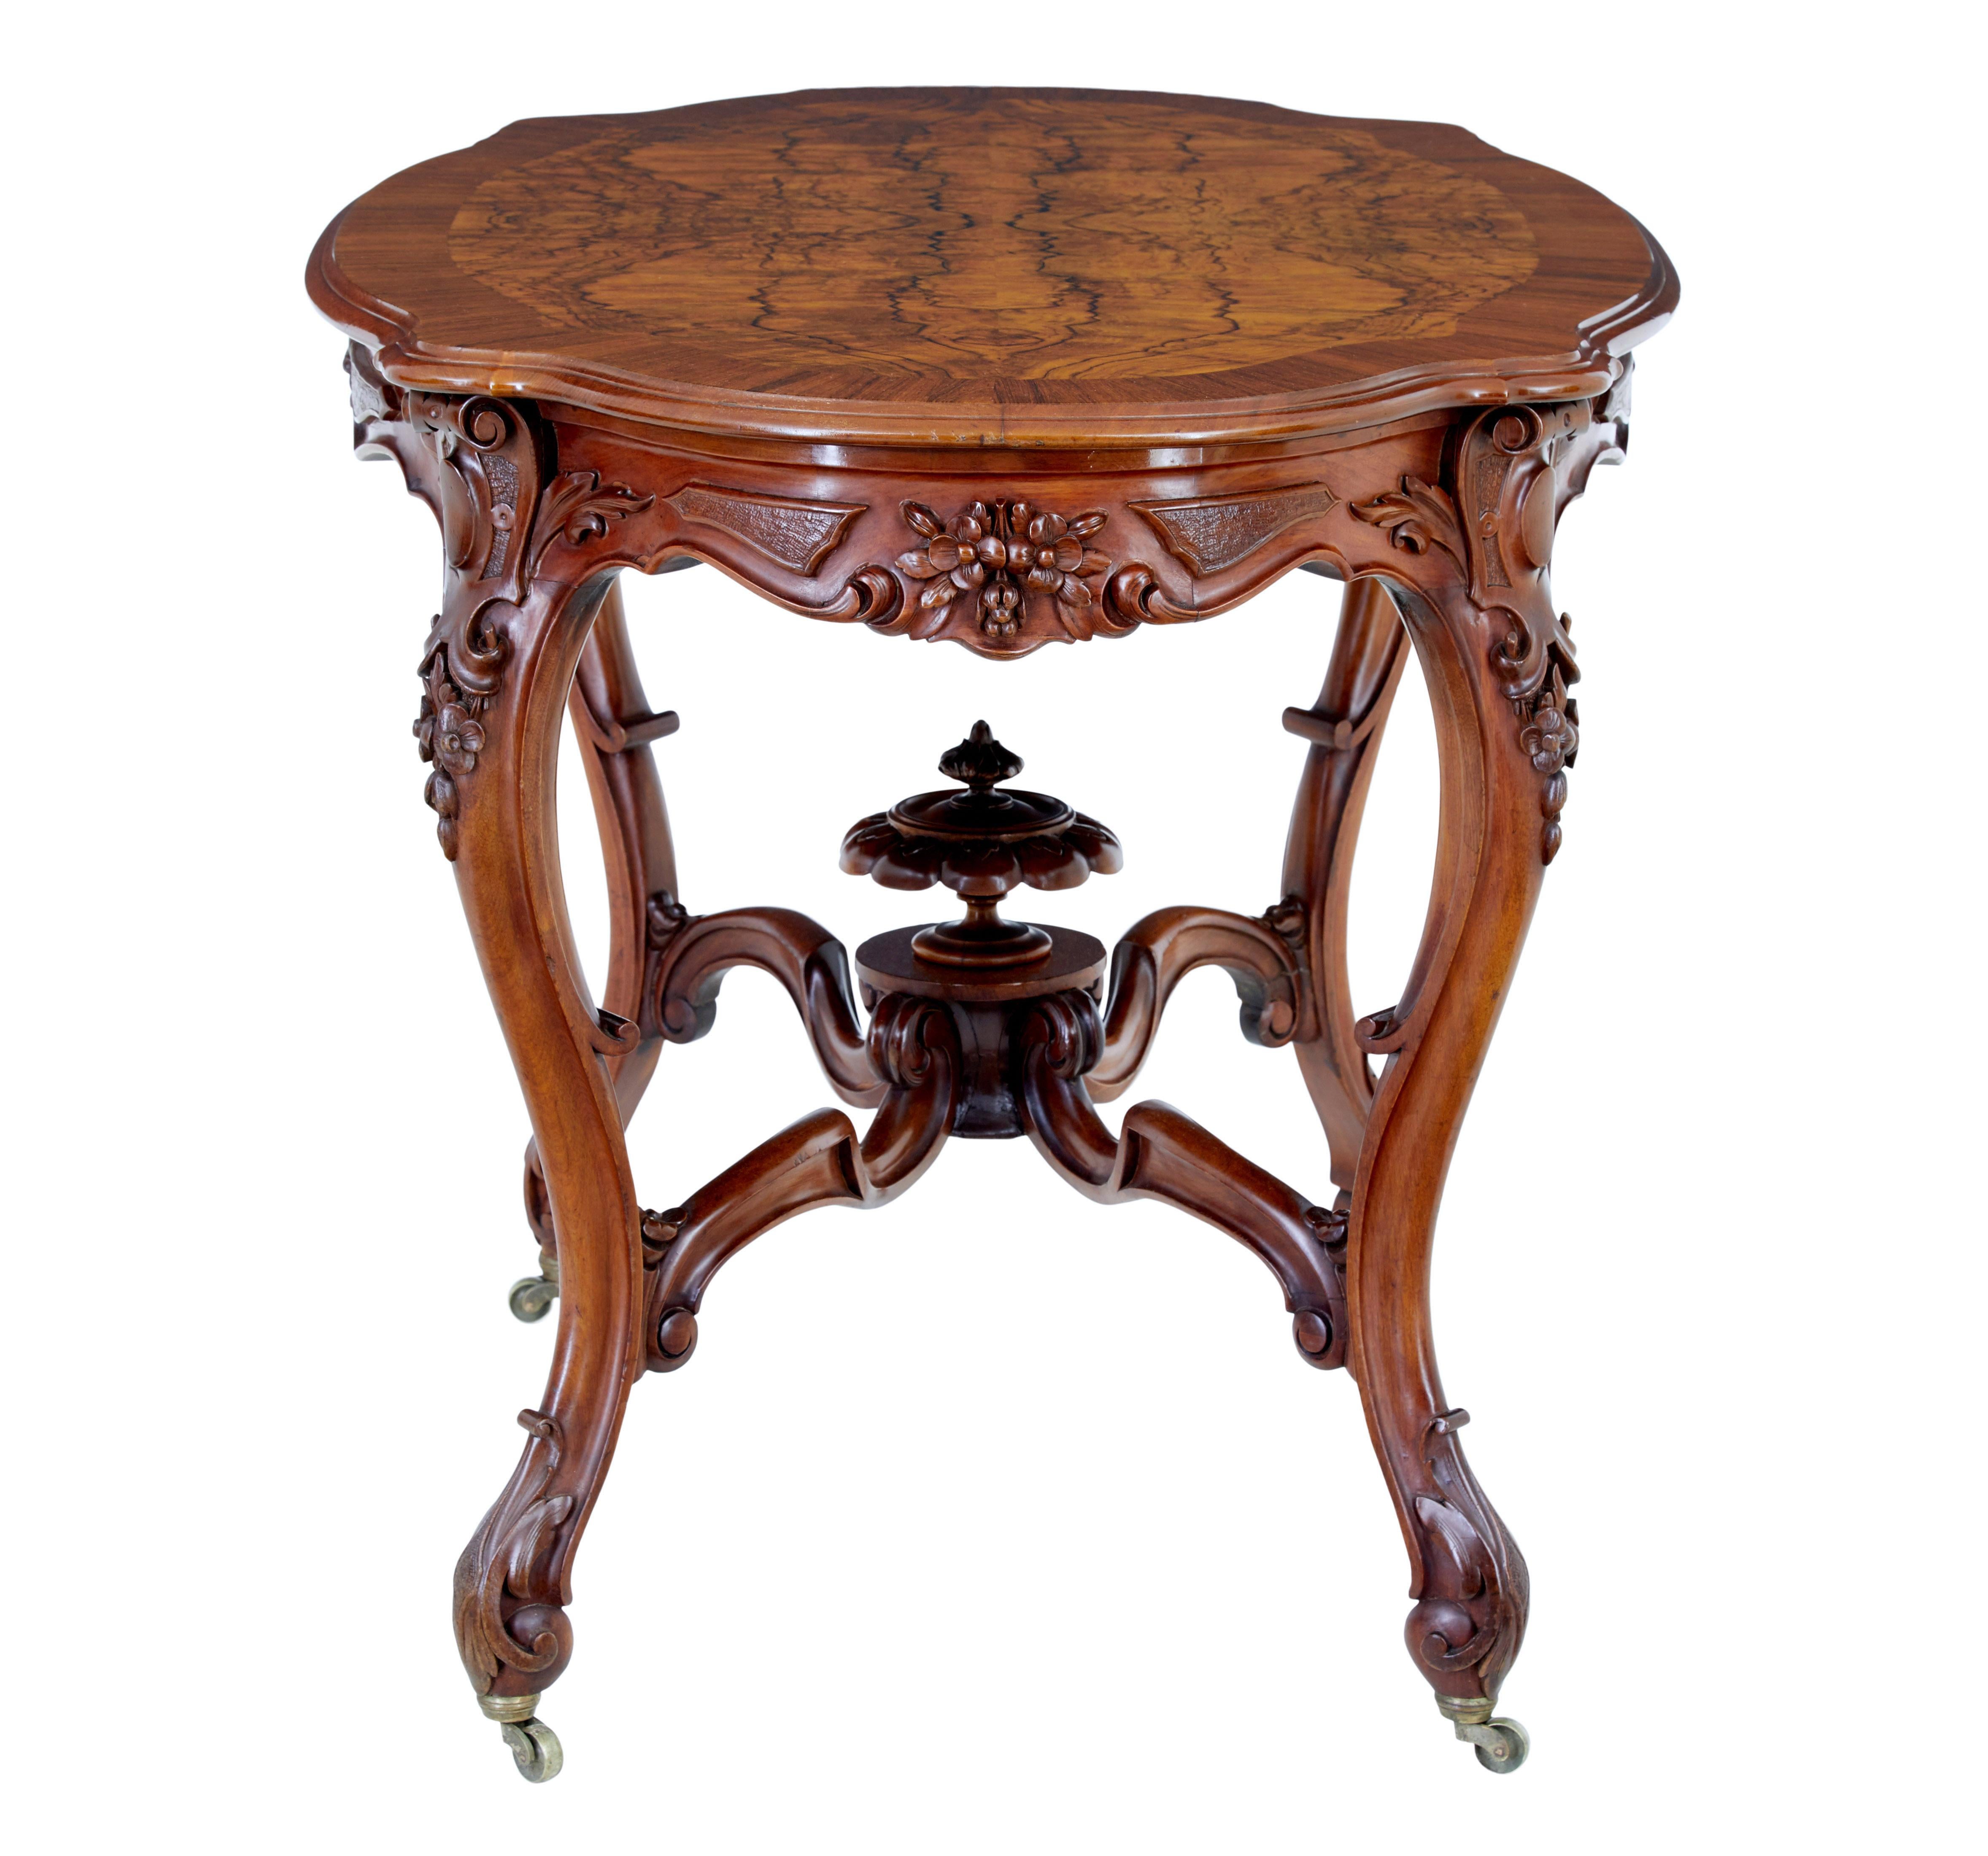 19th century carved walnut occasional table circa 1890.

Fine quality rococo revival swedish made table.  Dimensions of this table lends itself to multiple uses, such as a centre, sofa or side table.

Cartouche shaped top with a matched burr walnut